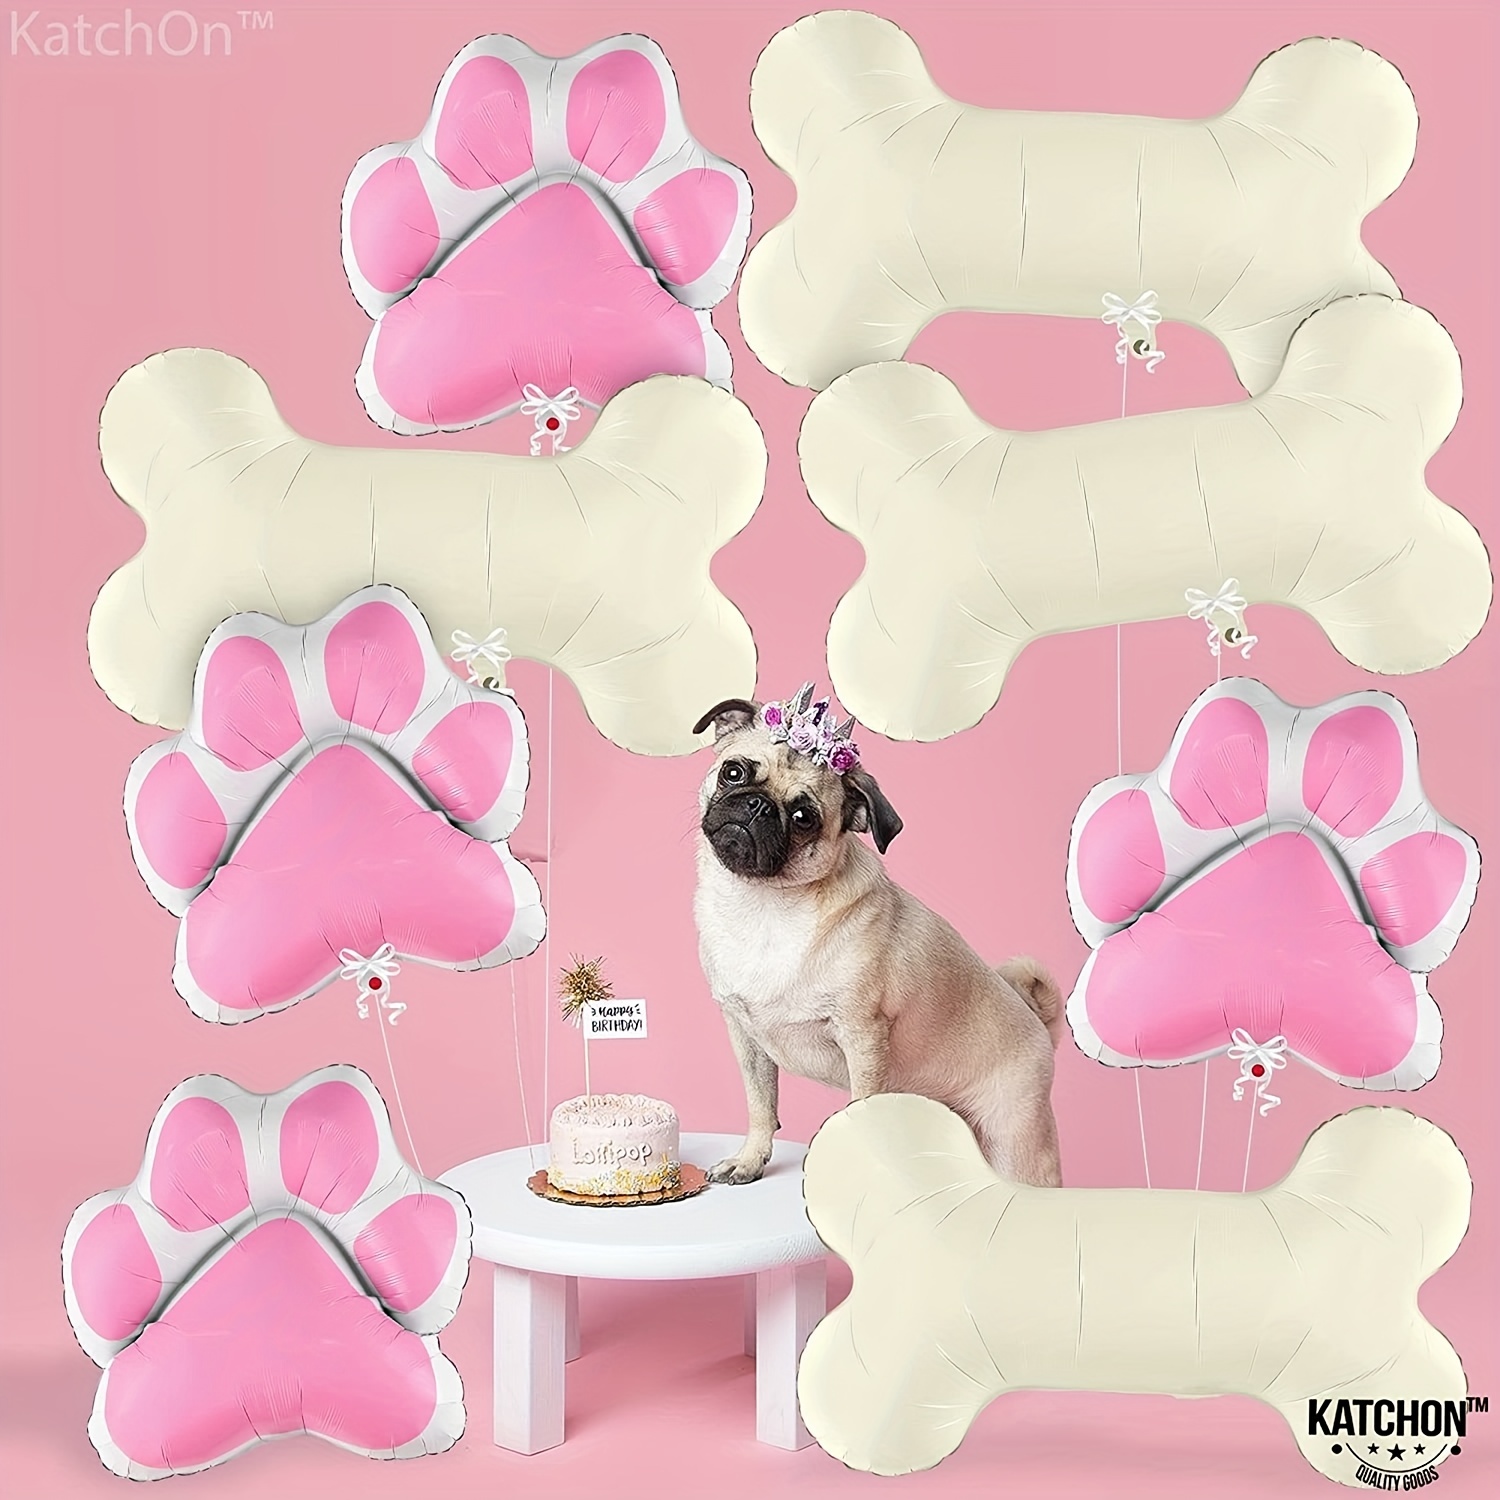 Pets Dog Paw Latex Balloons, Balloons Dogs Cats